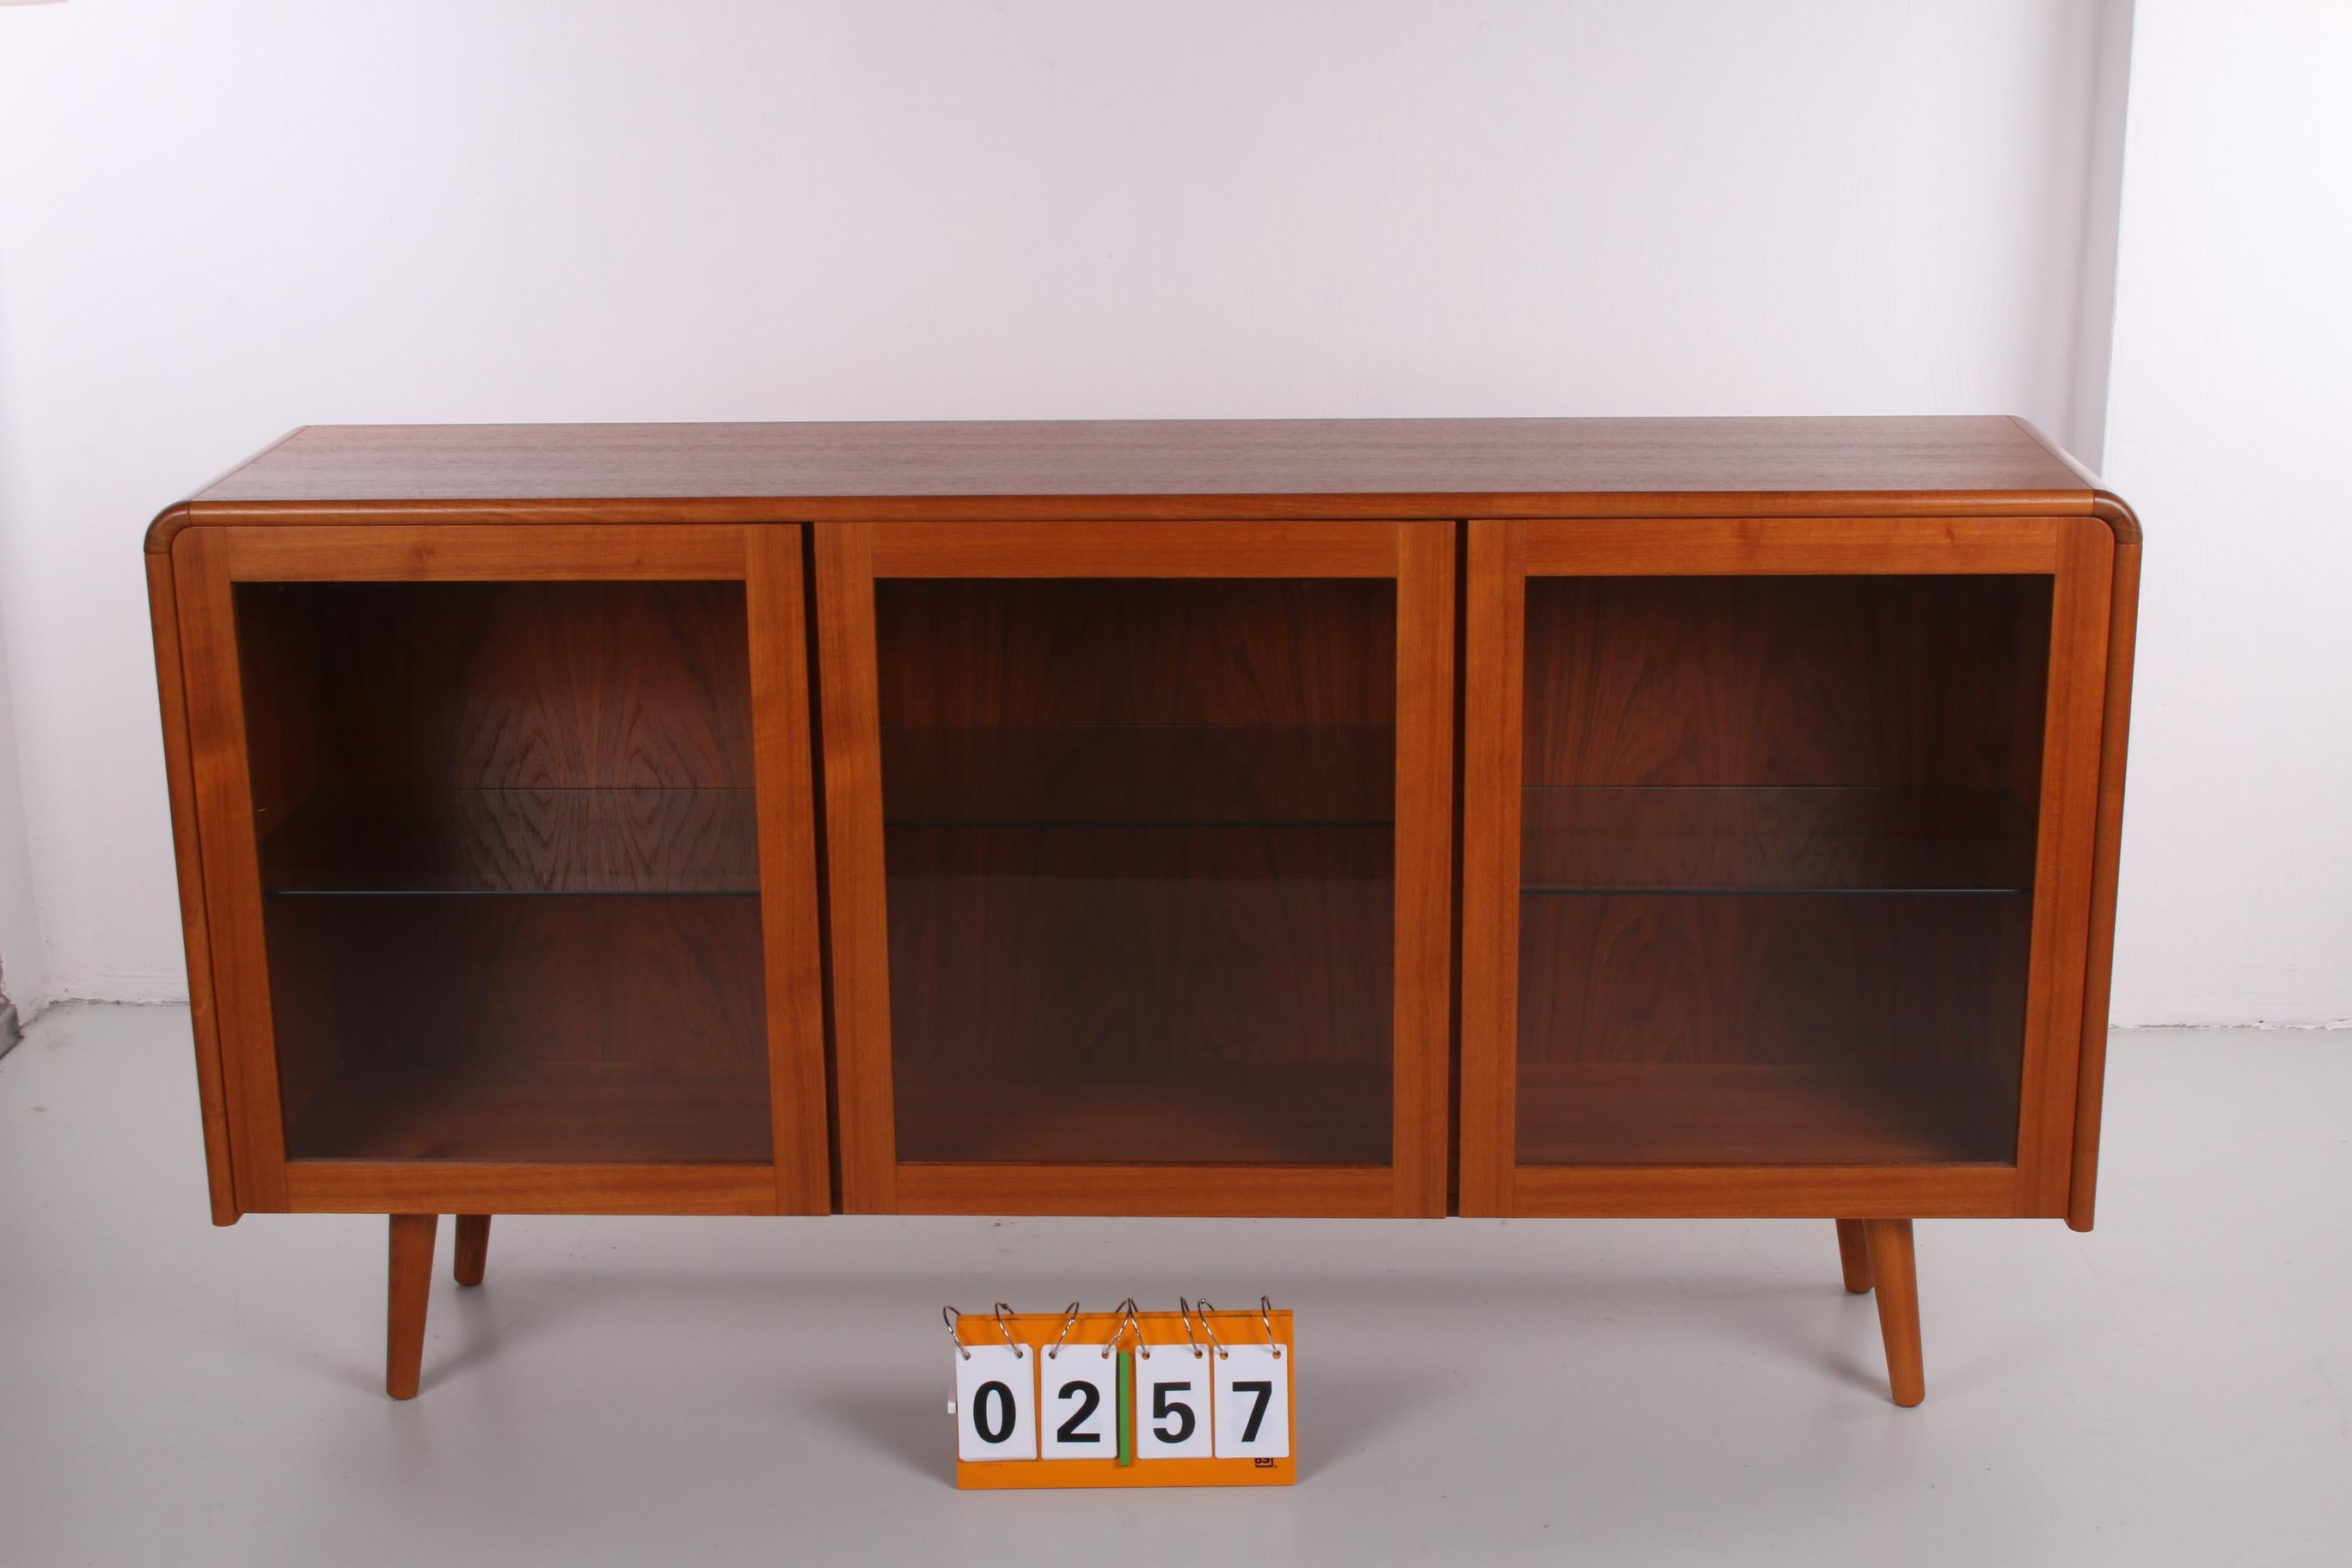 Mid-20th Century Danish Design Sideboard Display Cabinet with Lighting 1960s Made in Denmark